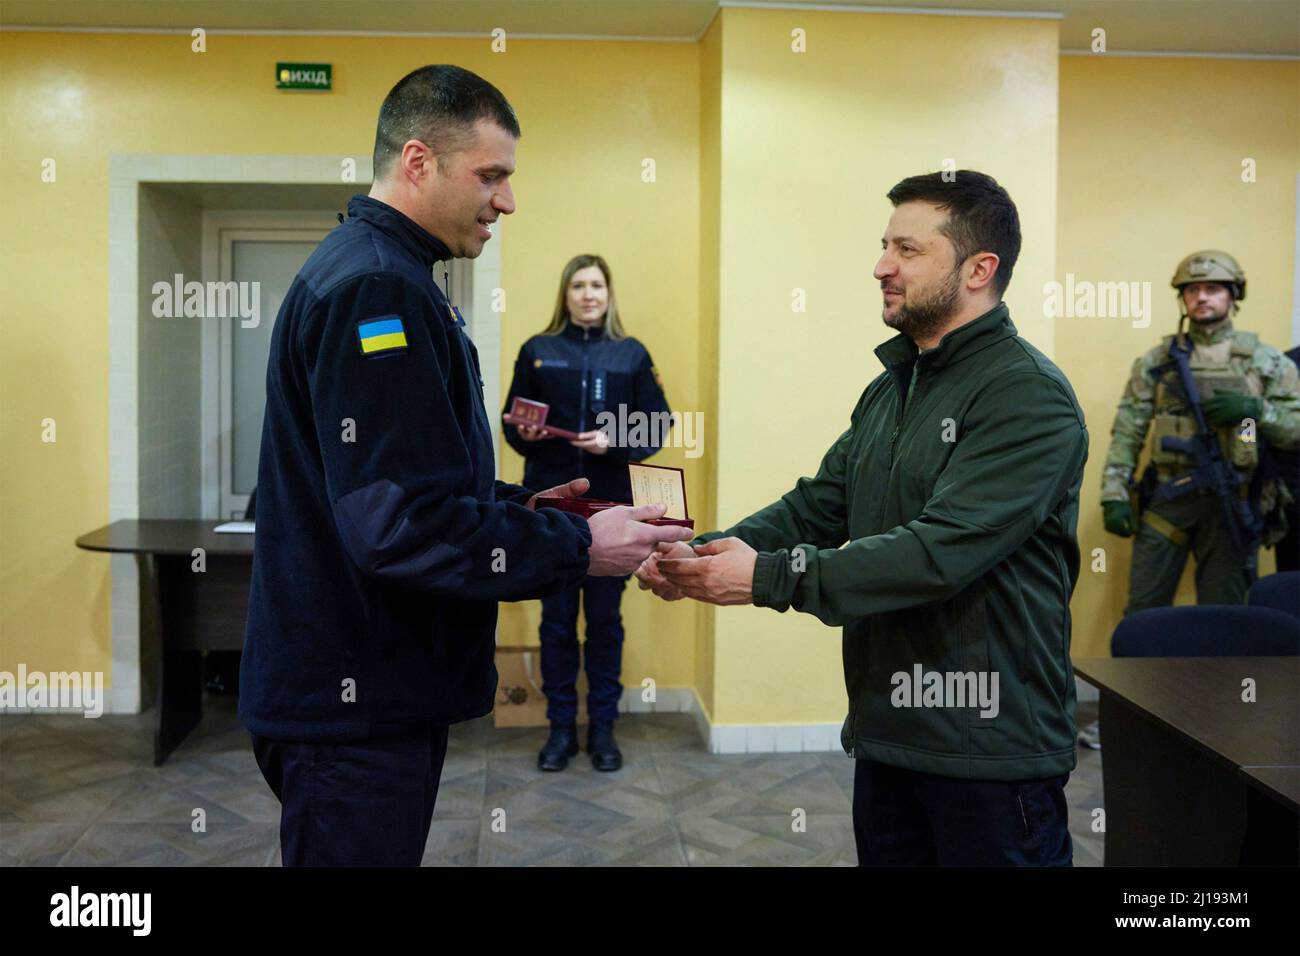 Kyiv, Ukraine. 17 March, 2022. Ukrainian President Volodymyr Zelenskyy presents medal to State Emergency Service employees who fought off Russian invaders during a visit to their offices, March 17, 2022 in Kyiv, Ukraine.  Credit: Ukraine Presidency/Ukraine Presidency/Alamy Live News Stock Photo